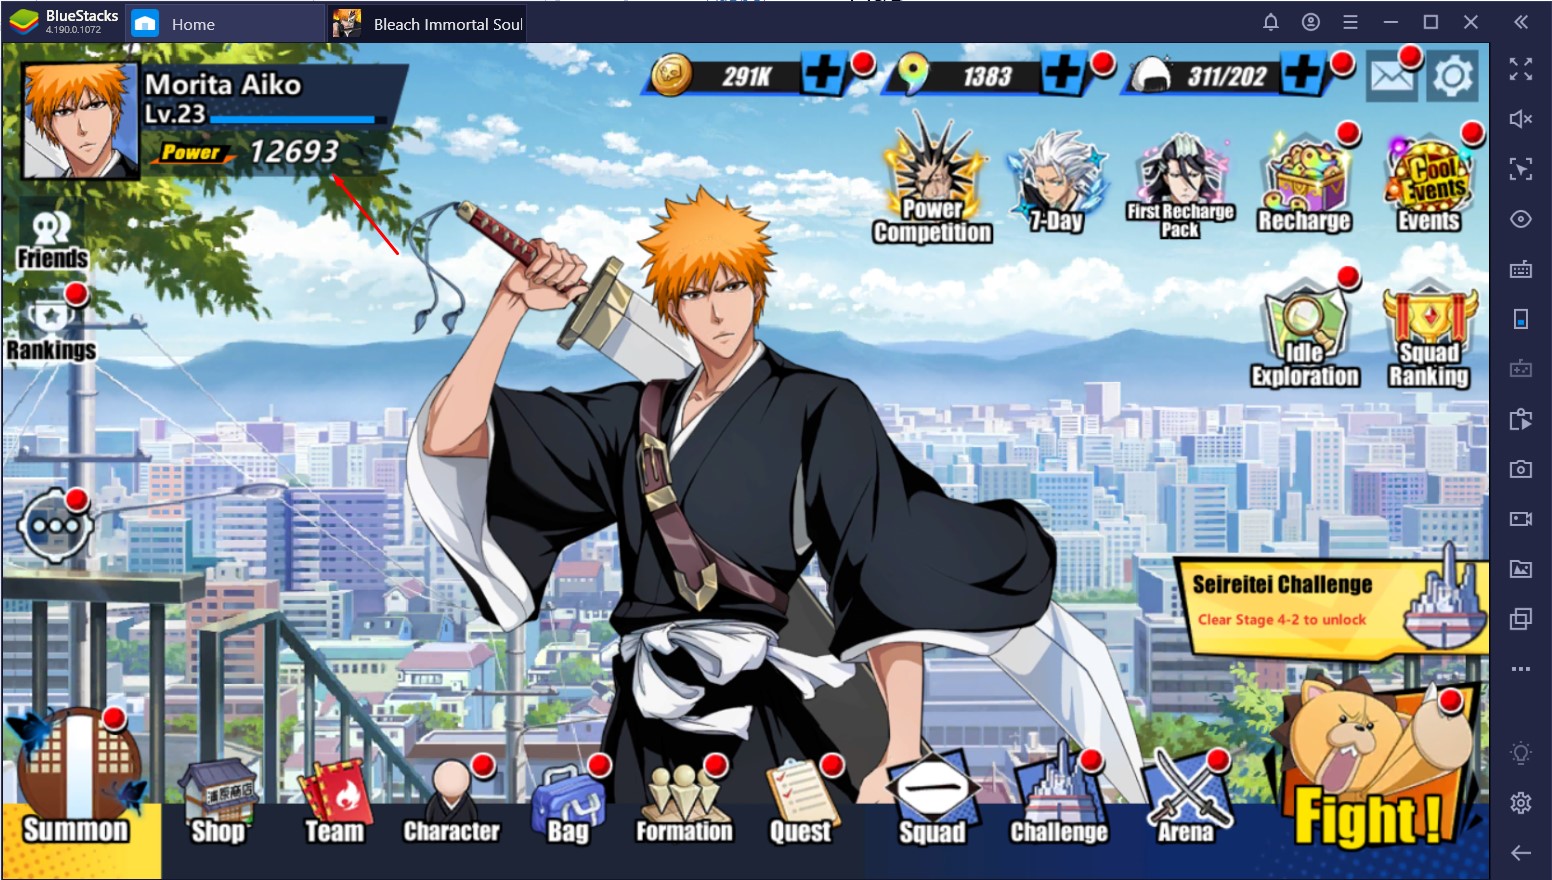 Bleach: Immortal Soul on PC – Team Formation Guide